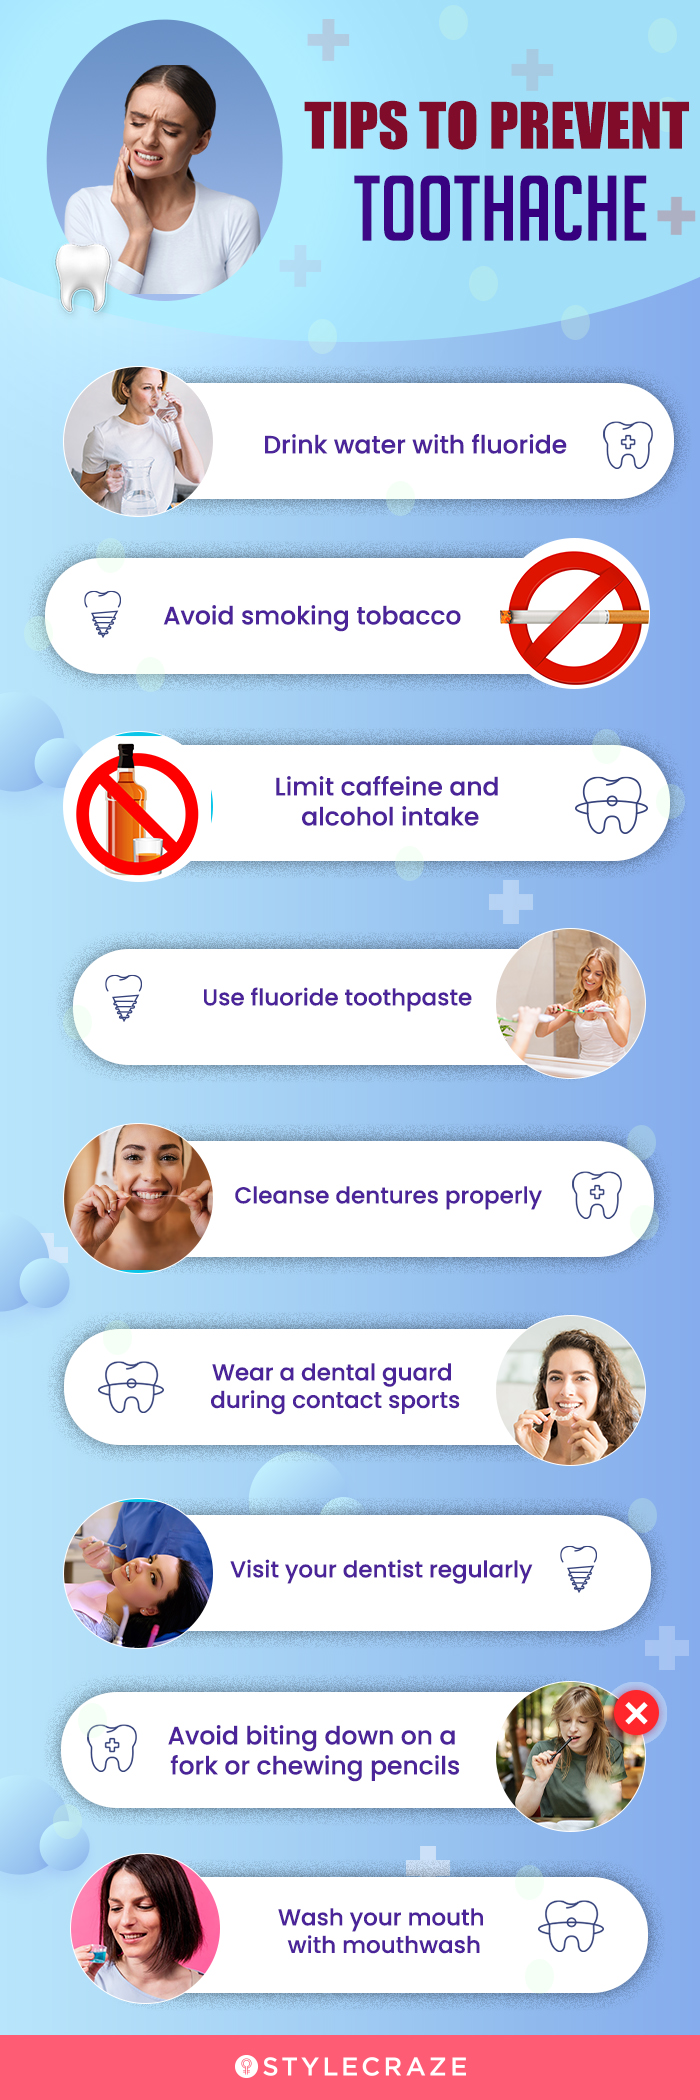 tips to prevent toothache [infographic]